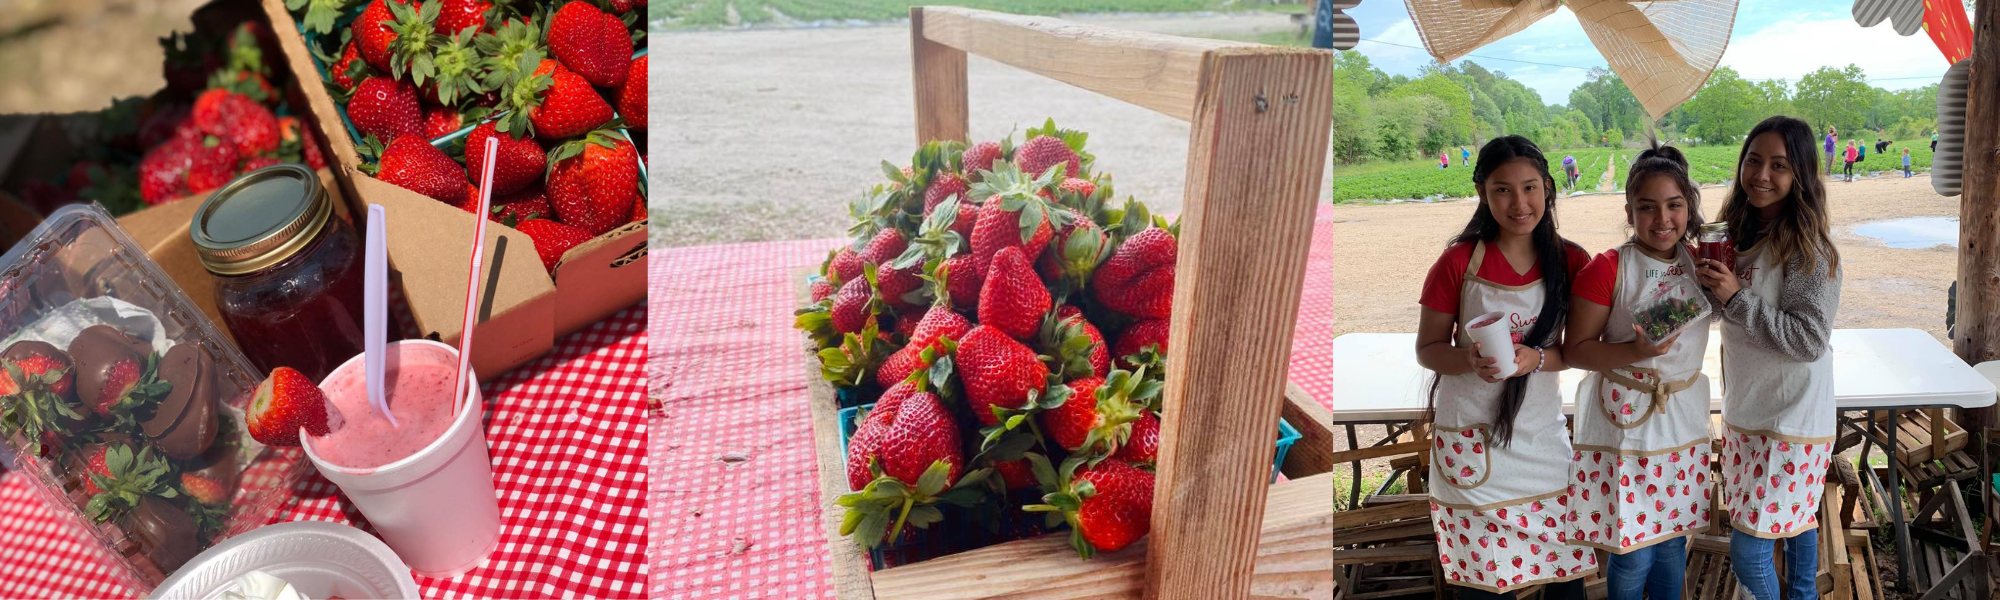 chocolate covered strawberries, strawberry smoothie, and girls holding fresh strawberries from the field